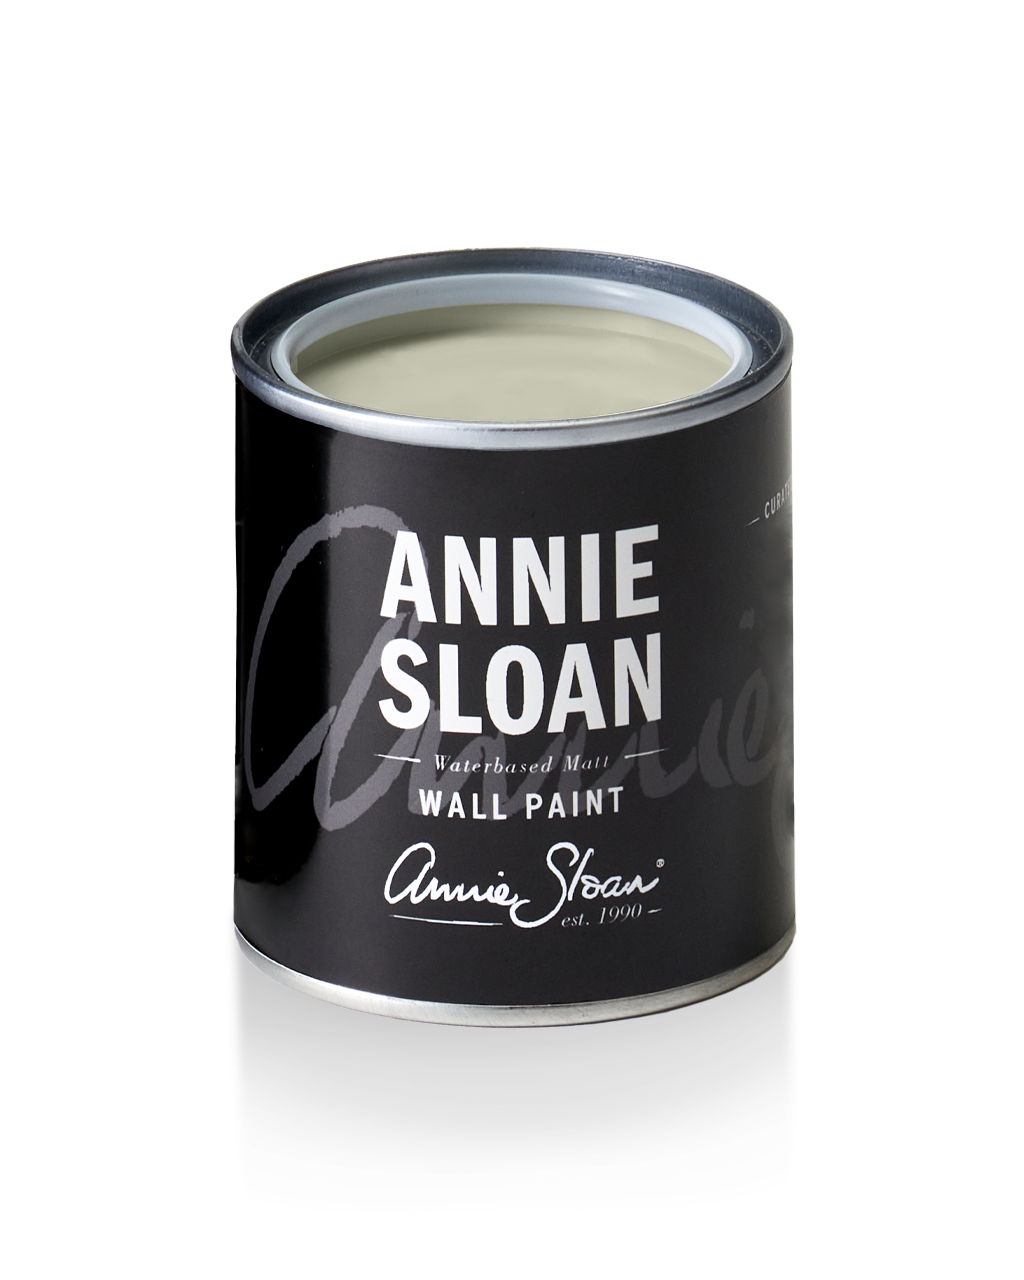 120ml tin of Cotswold Green wall paint by Annie Sloan